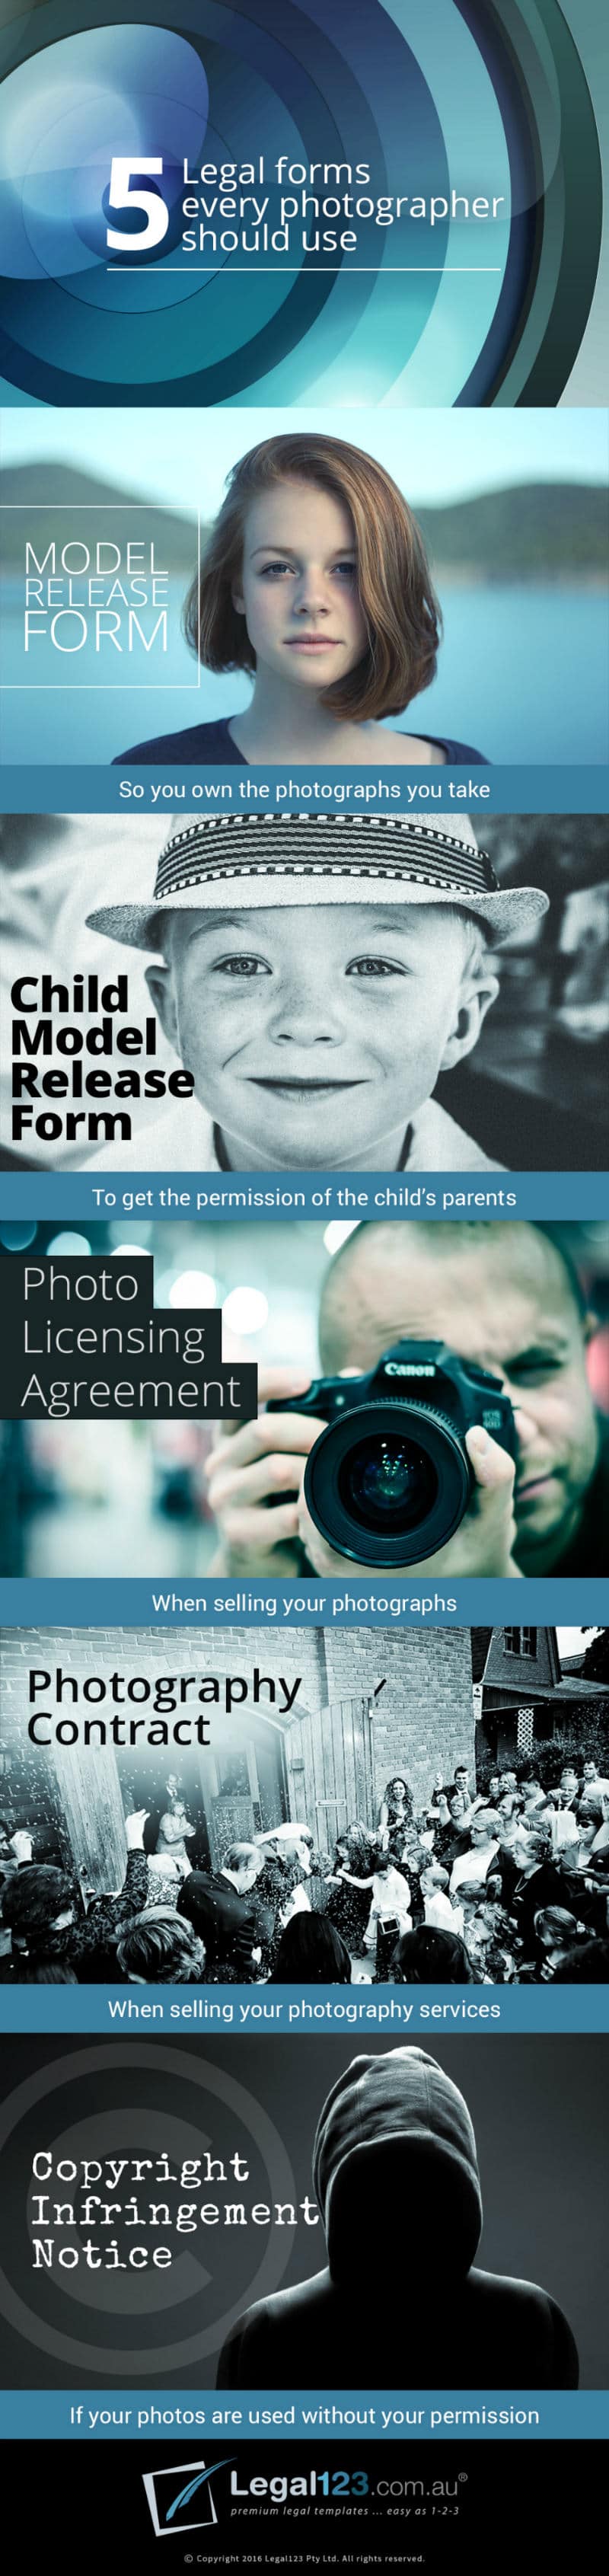 image of legal forms for photographers